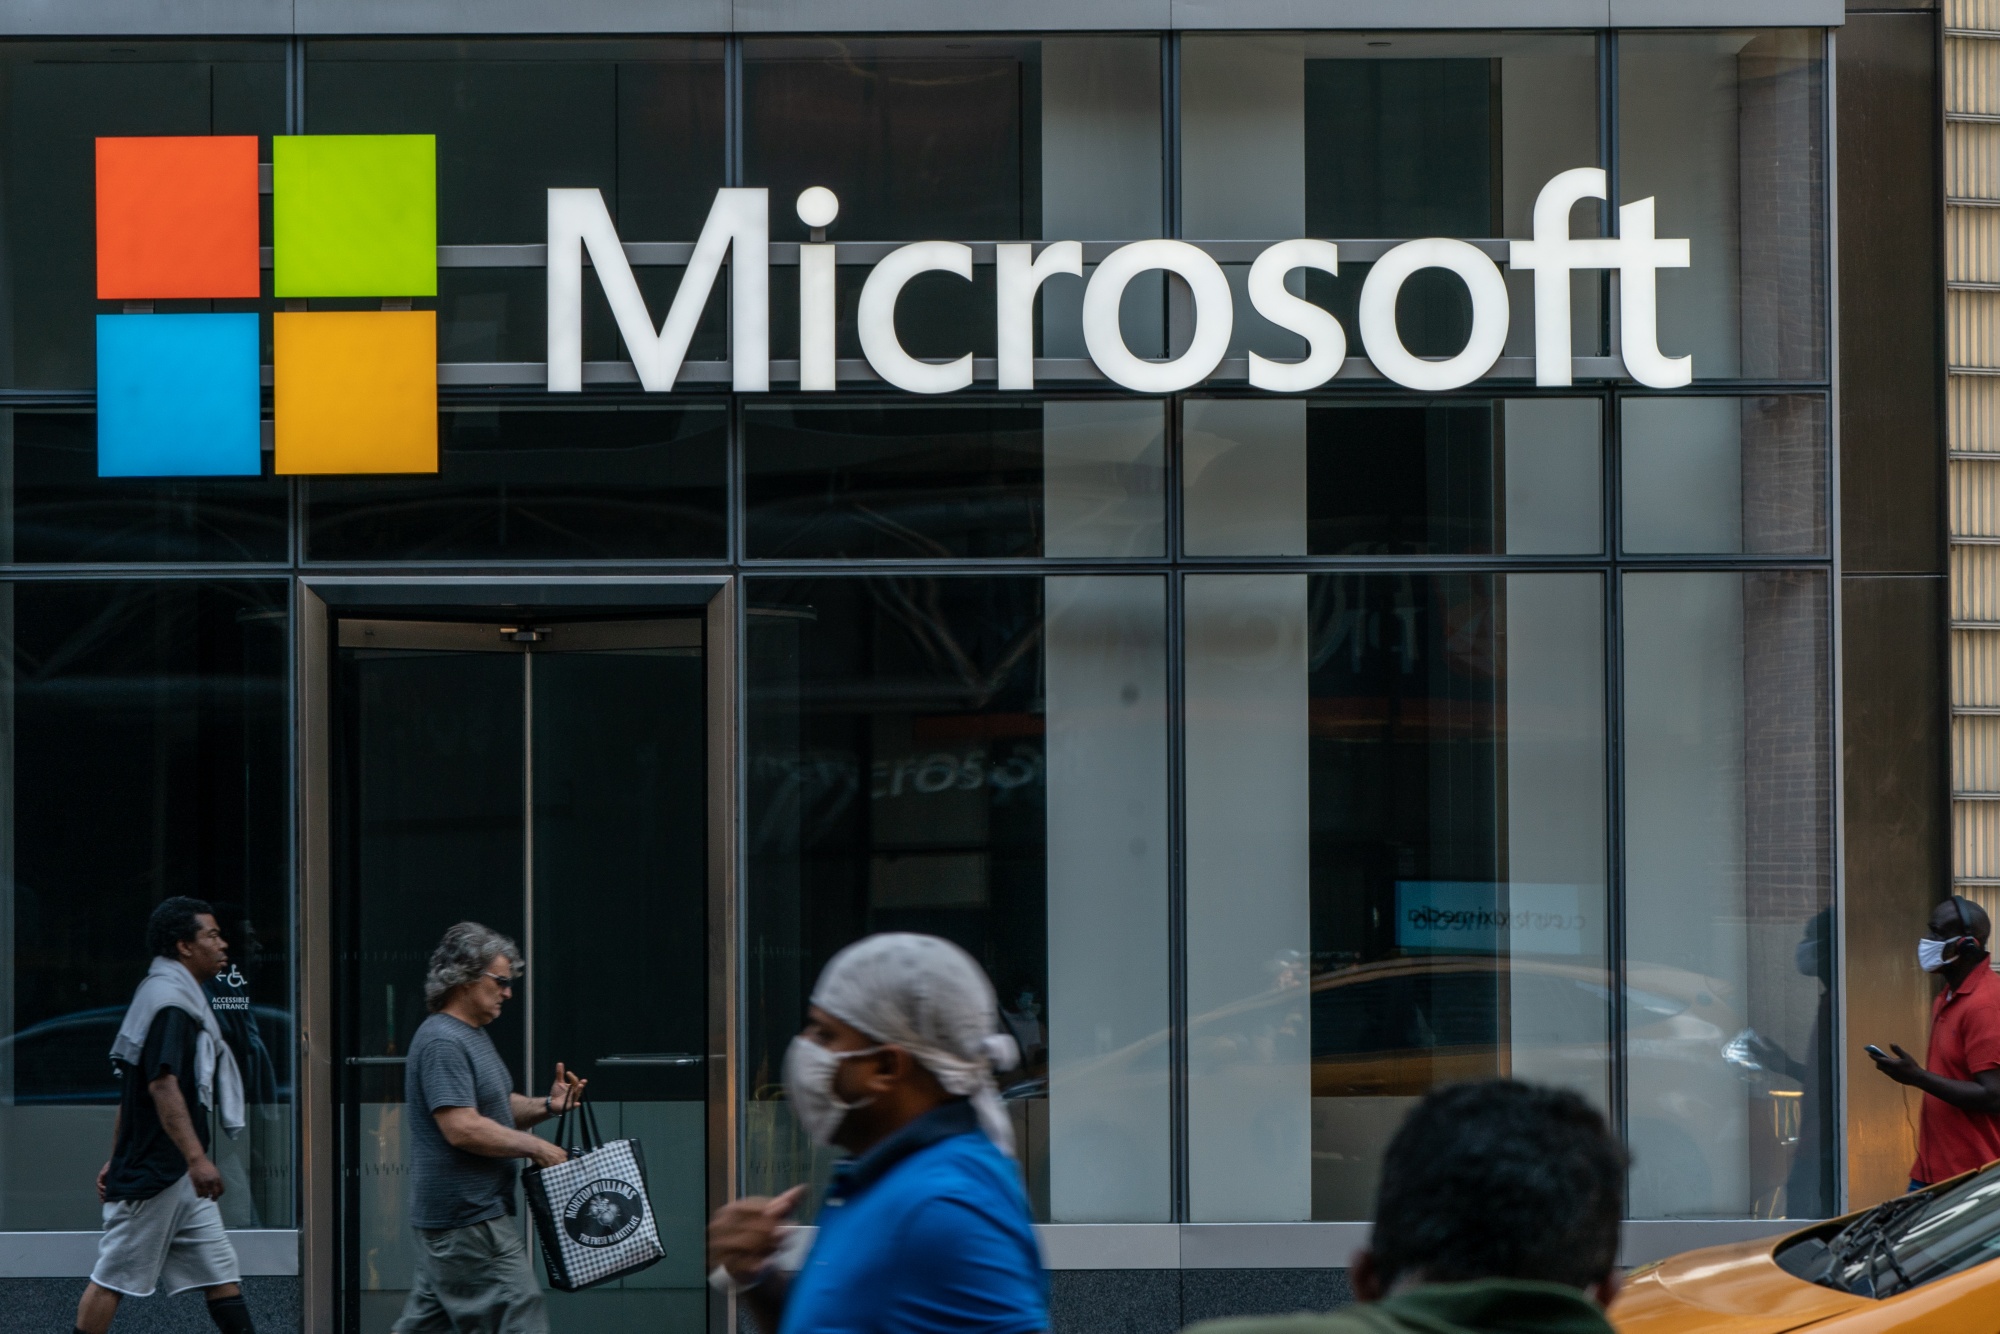 Microsoft (MSFT) Signals More Tech Layoffs in 2022 Bloomberg